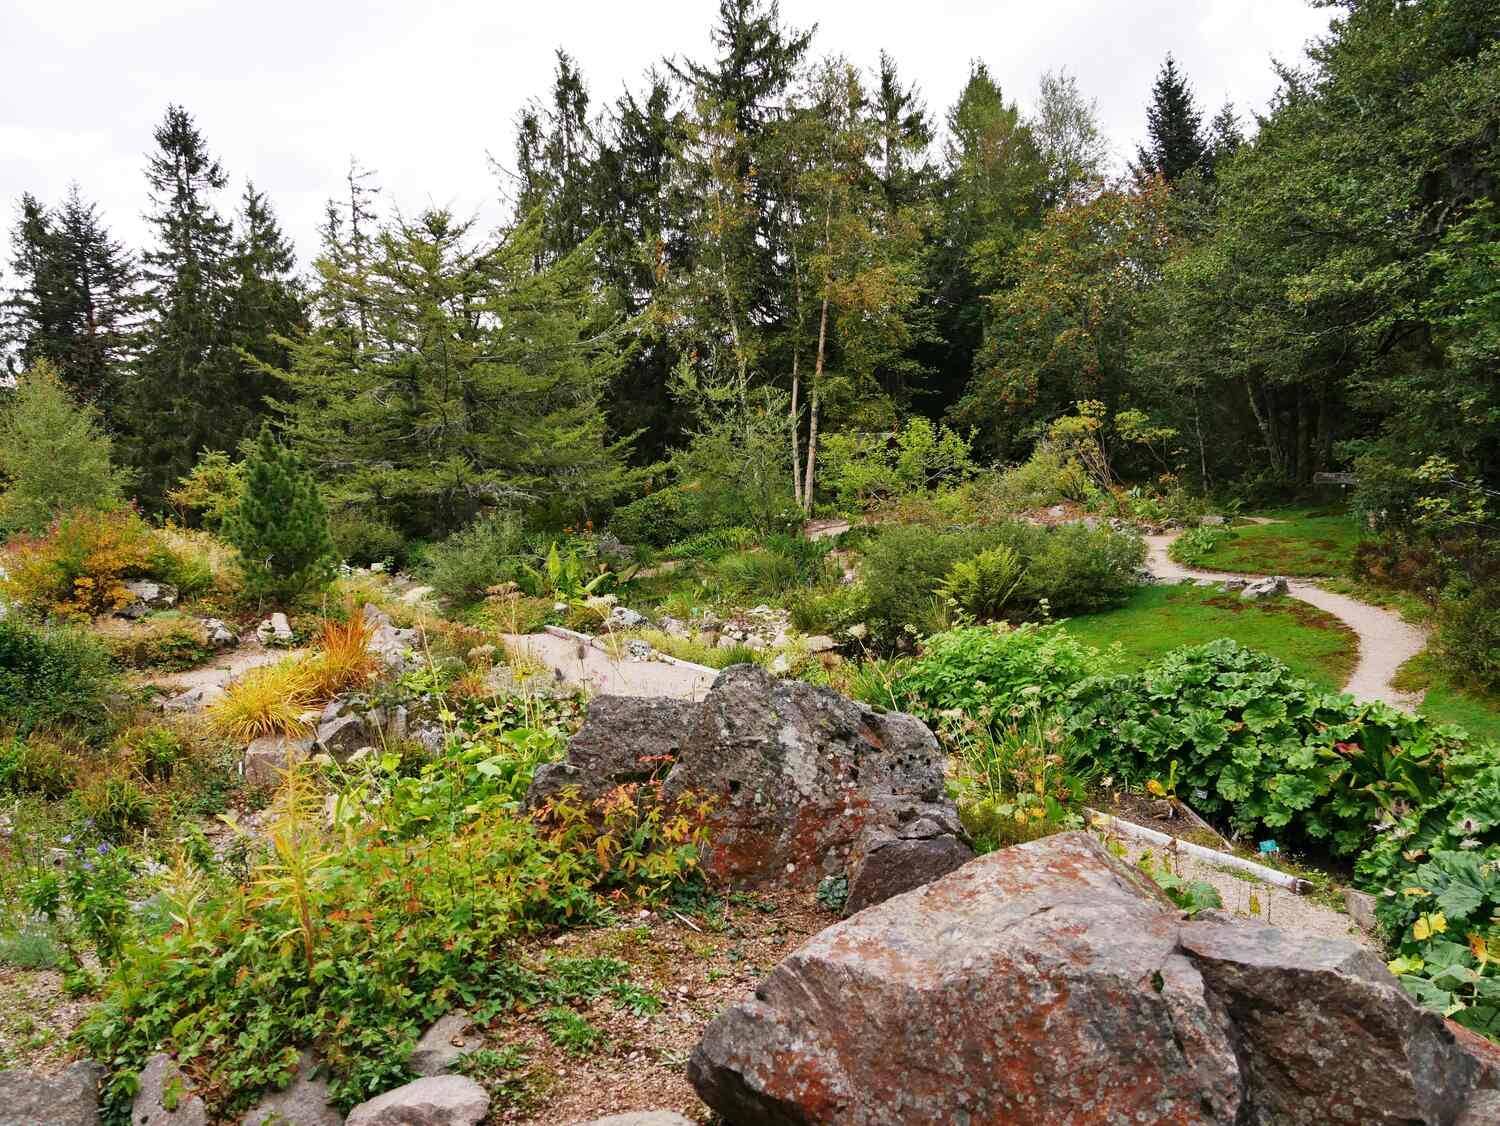 The Haut Chitelet high altitude garden at 43 kilometres from your spa hotel in the Vosges